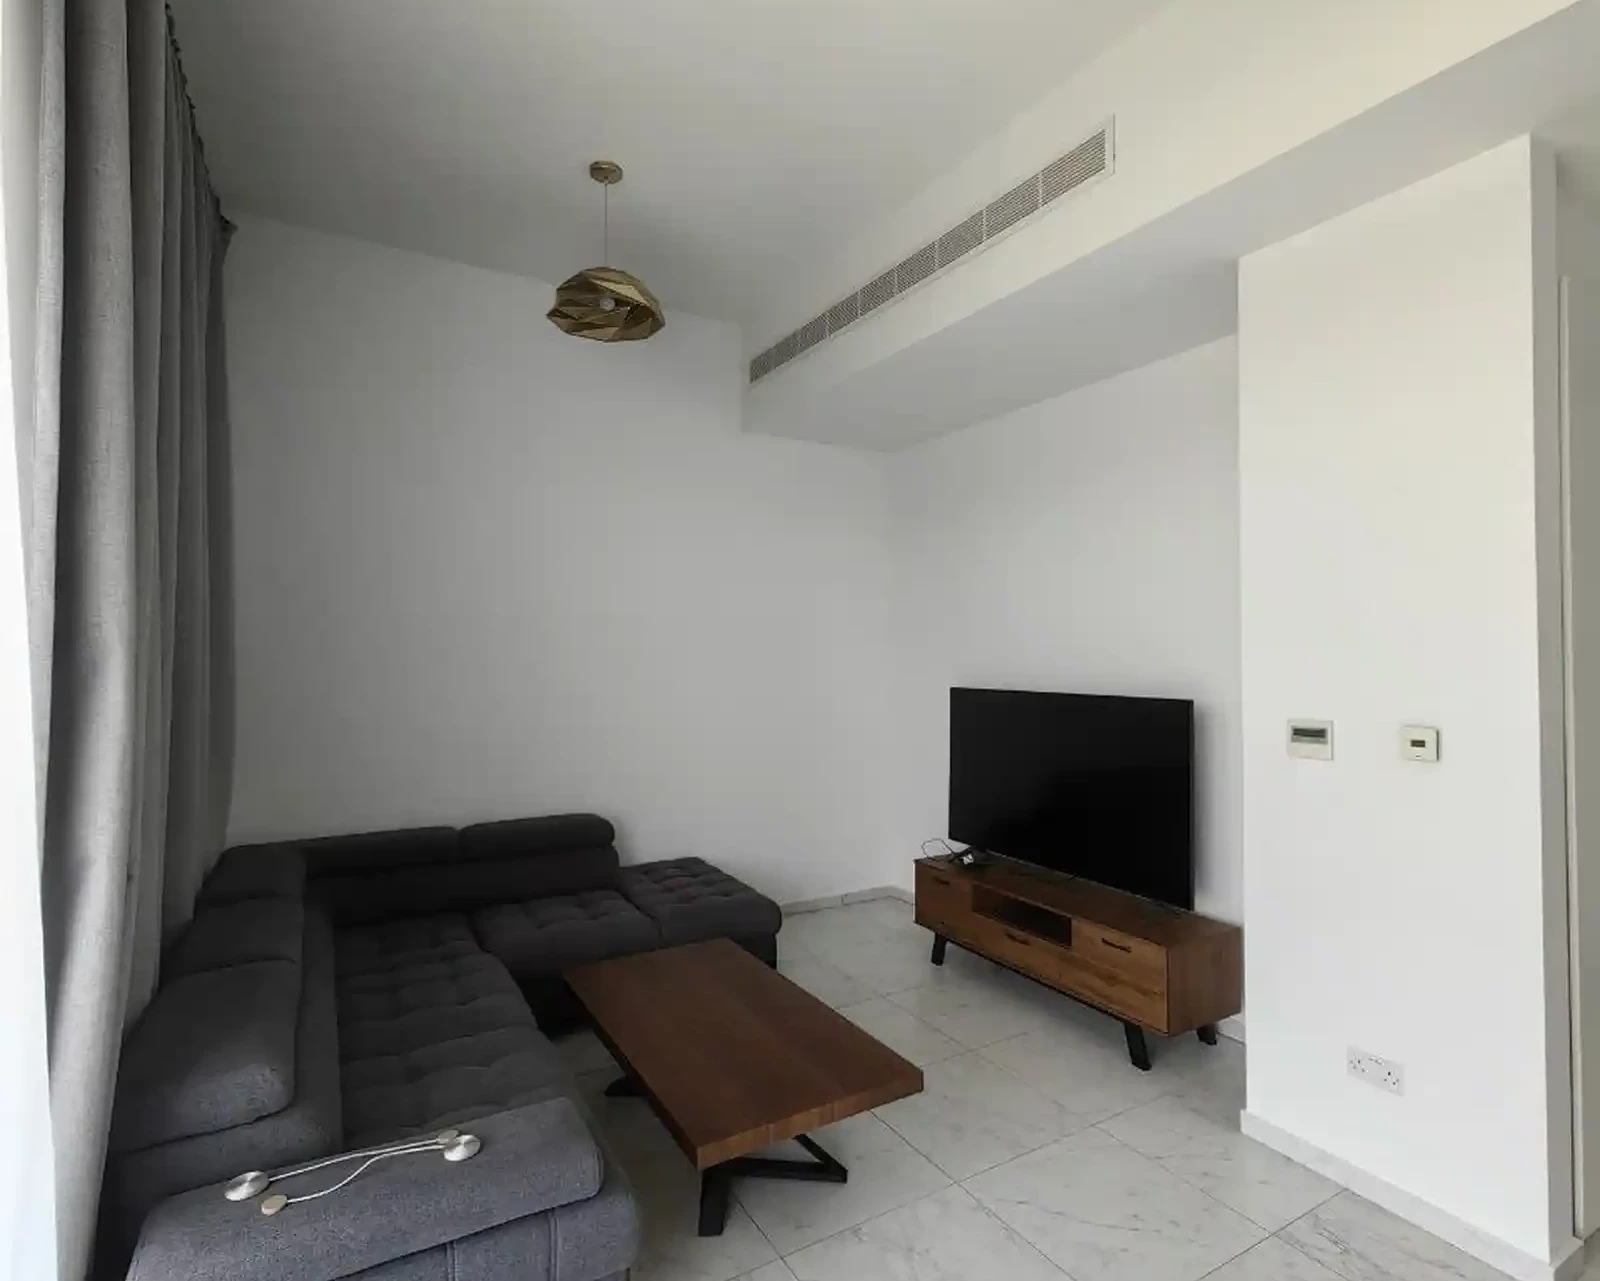 3-bedroom apartment to rent €2.550, image 1